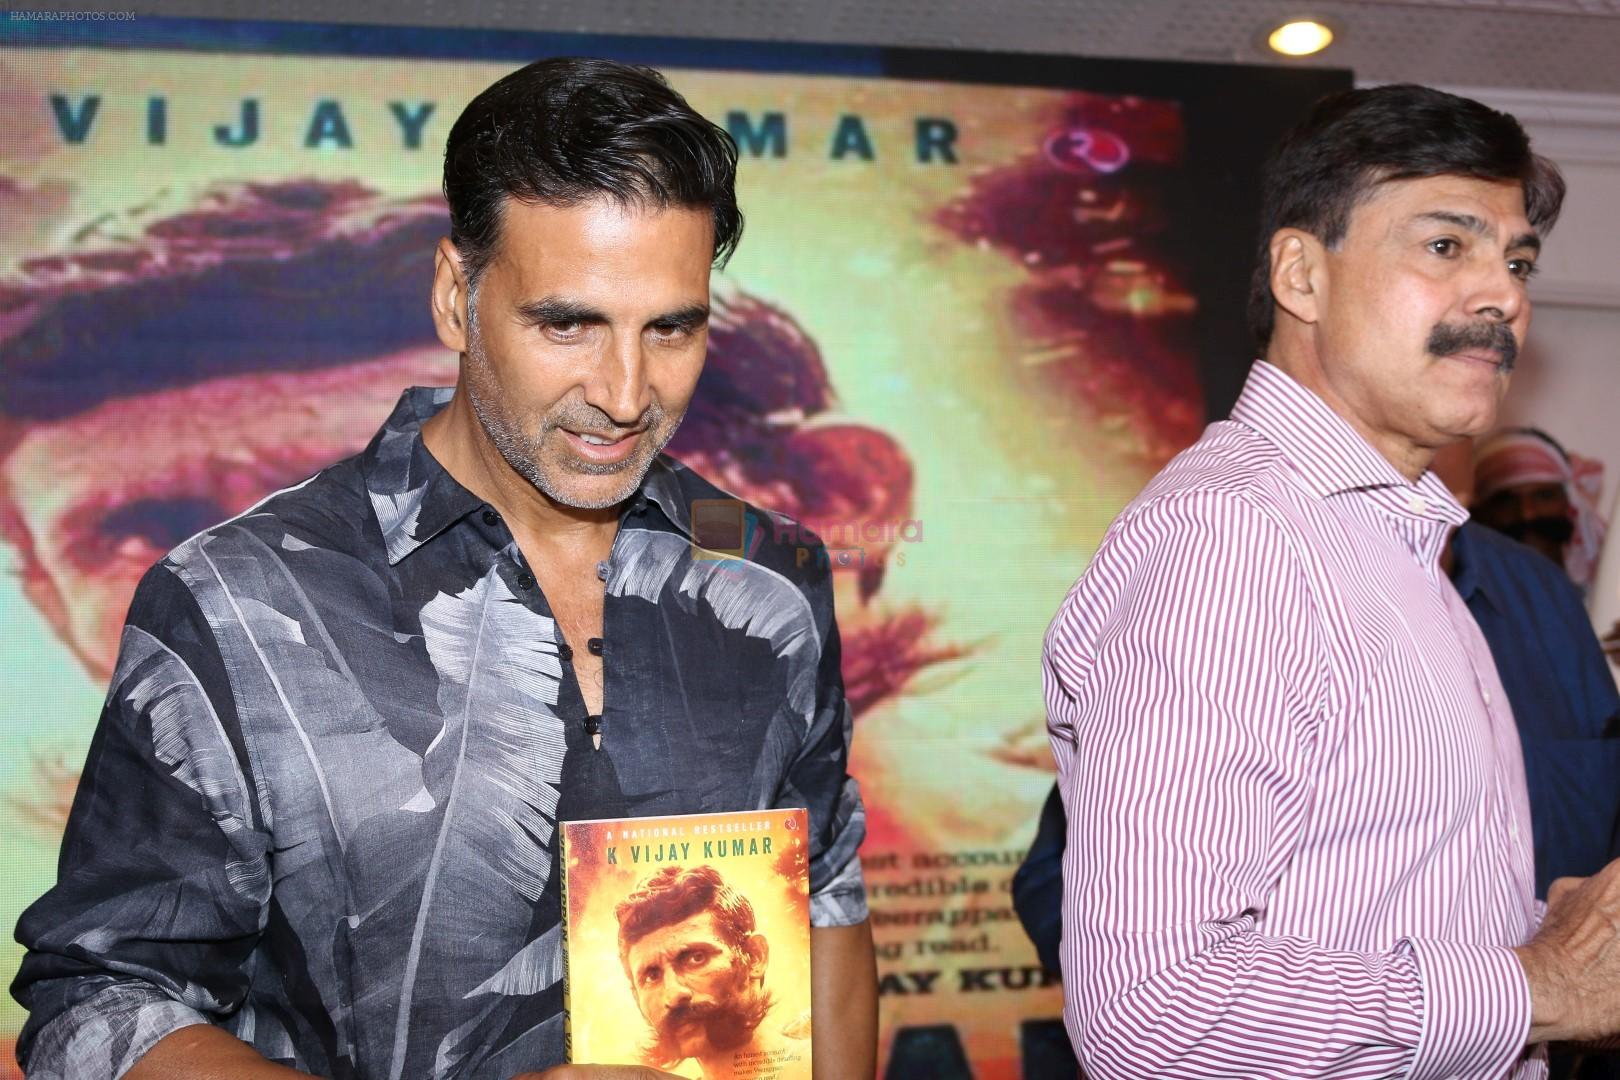 Akshay Kumar at The Book Launch Of Veerappan Chasing The Brigand on 19th April 2017